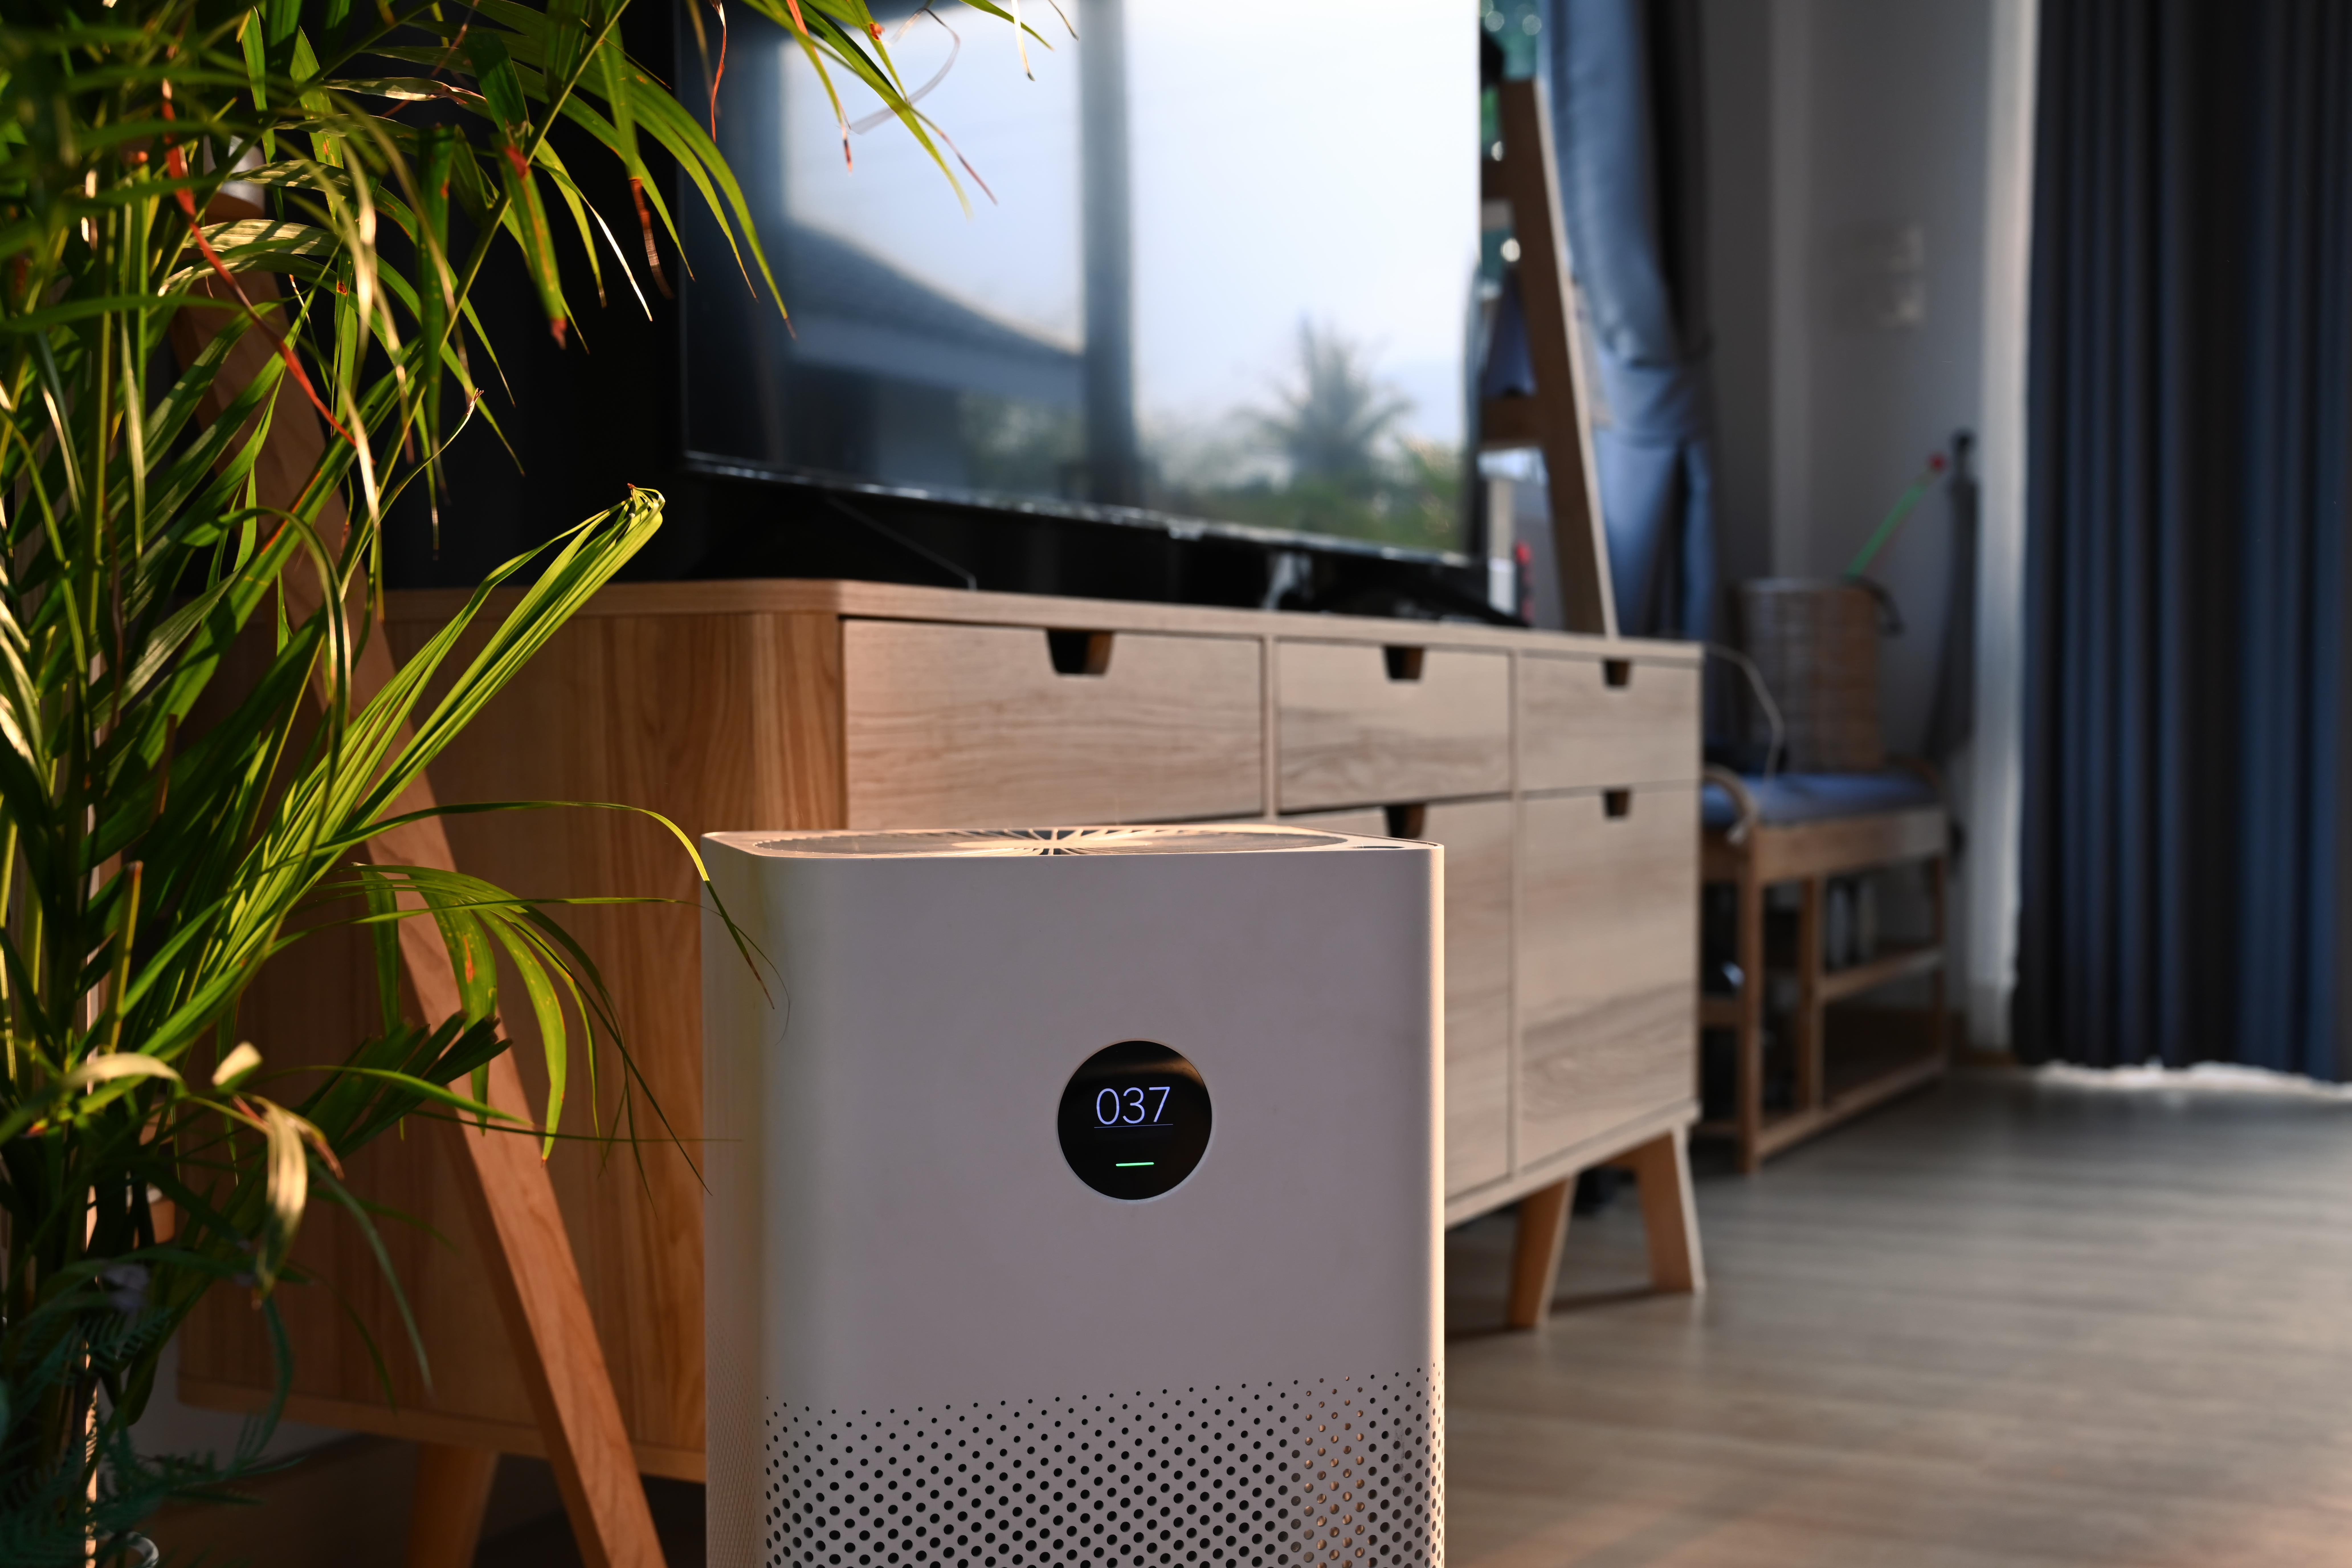 Close up view of portable air purifier on wooden floor in comfor